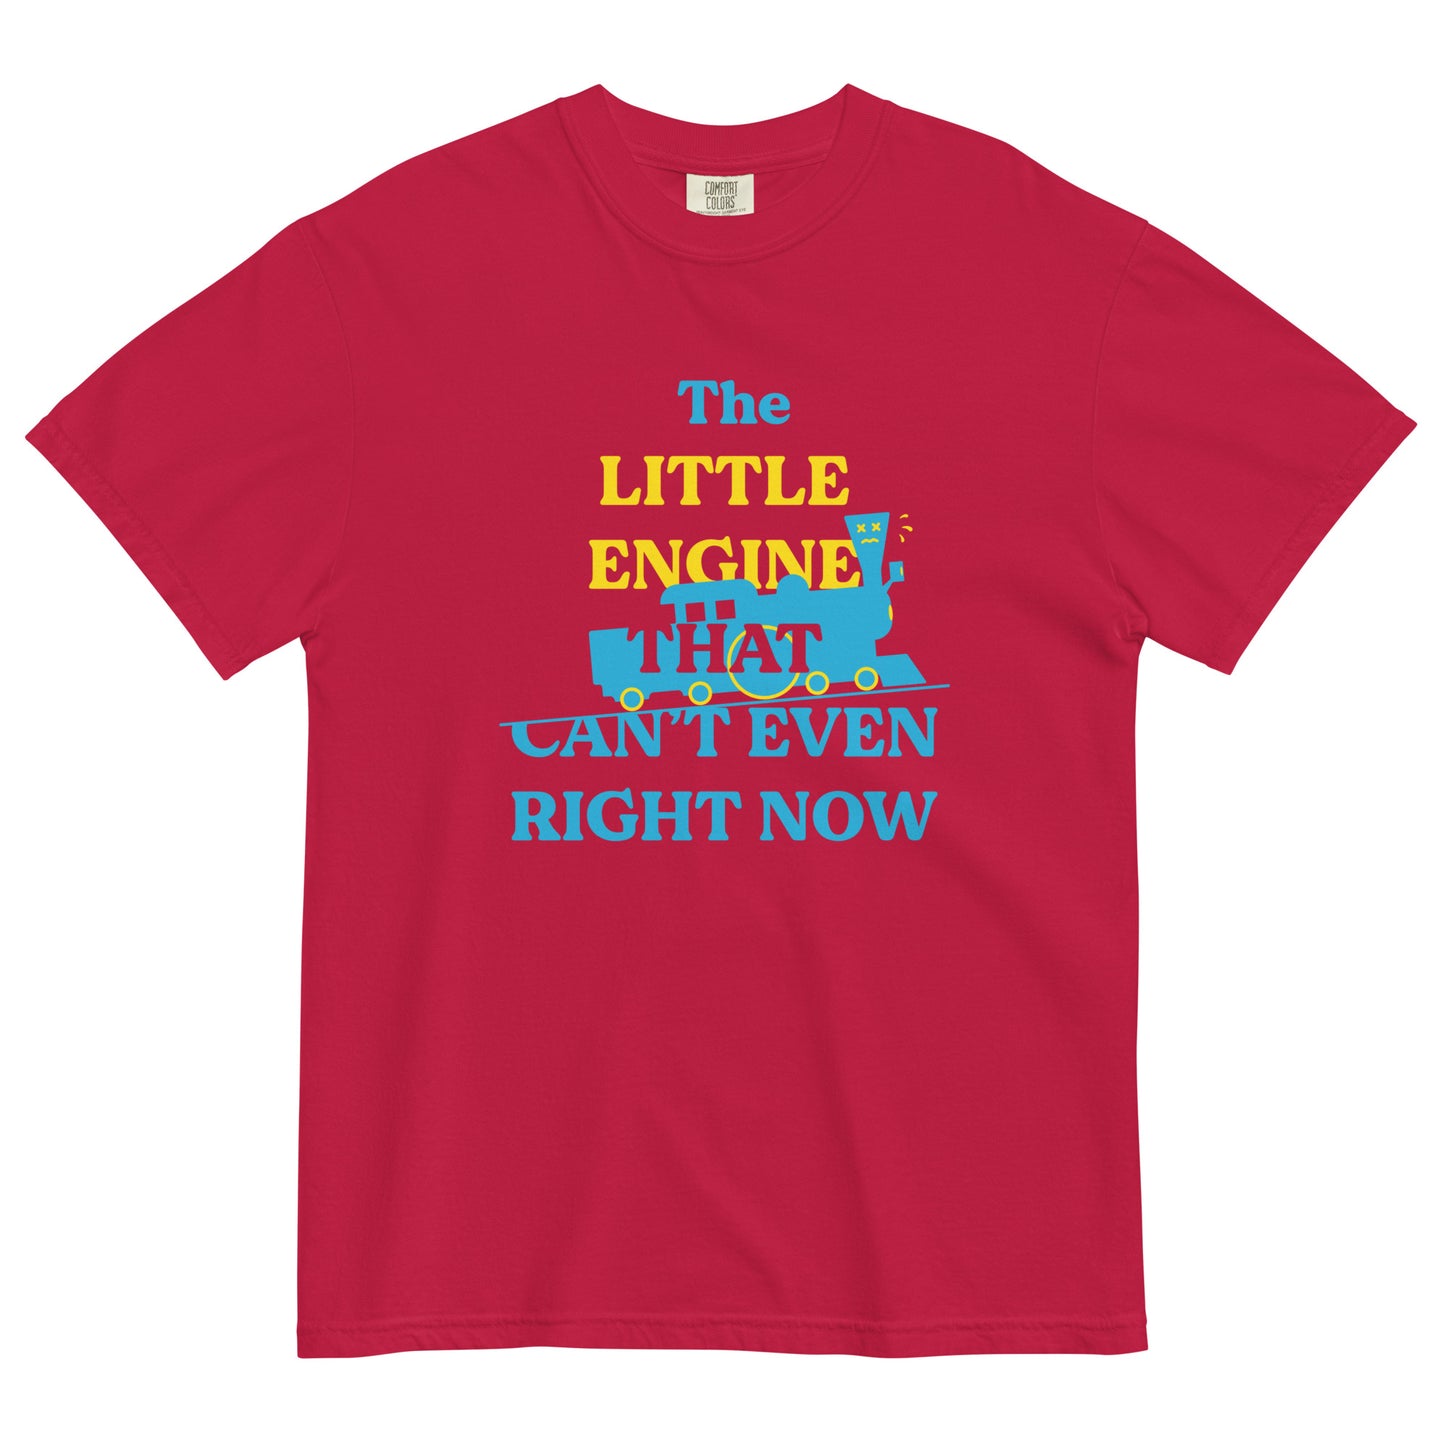 The Little Engine That Can't Even Right Now Men's Relaxed Fit Tee